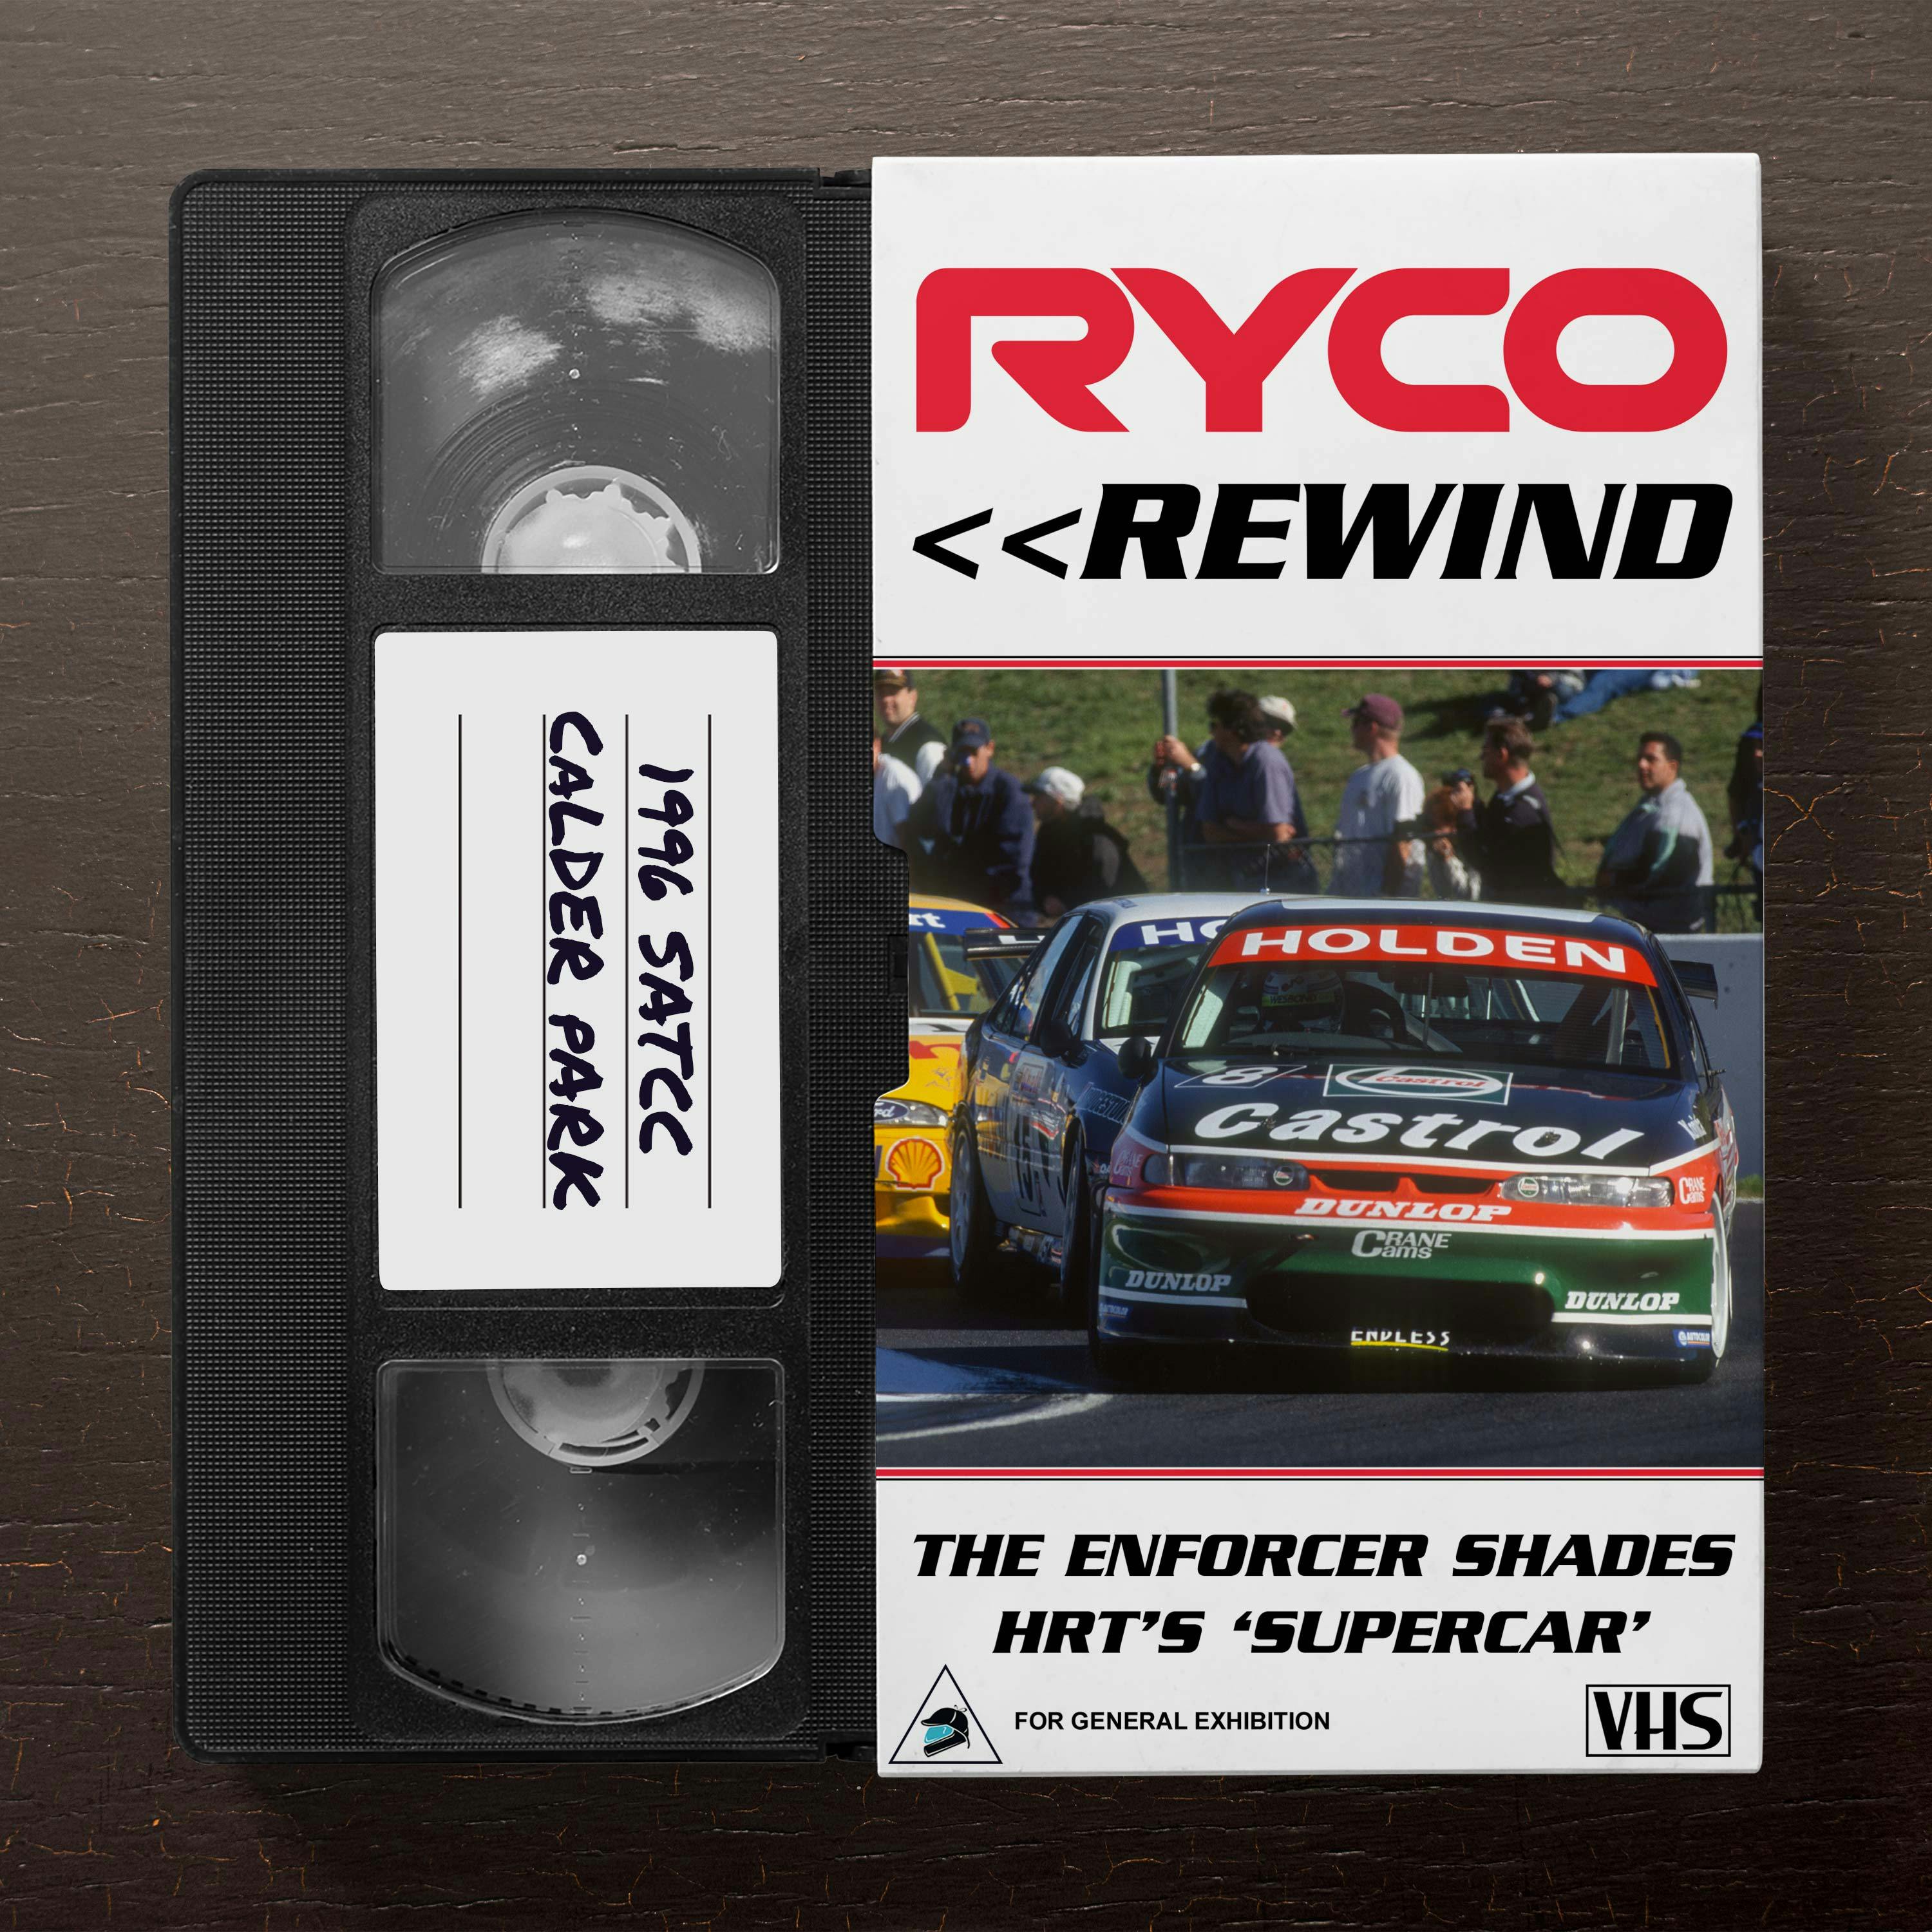 Ryco Rewind: The ‘Enforcer’ upstages HRT’s new ‘Supercar’